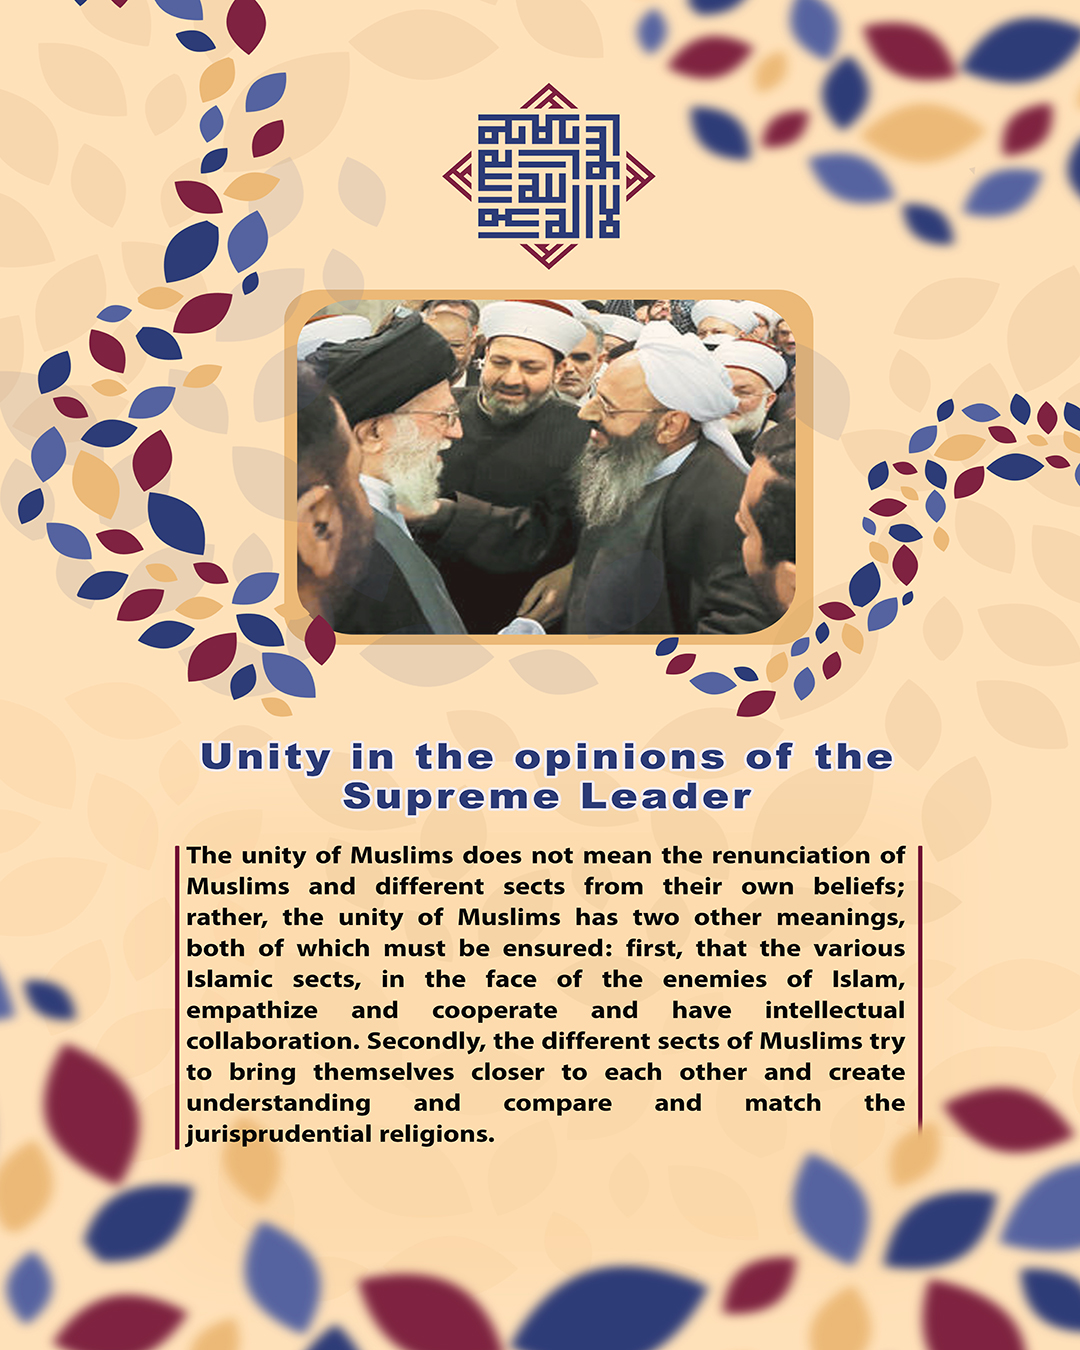 the unity of Muslims does not mean the renunciation